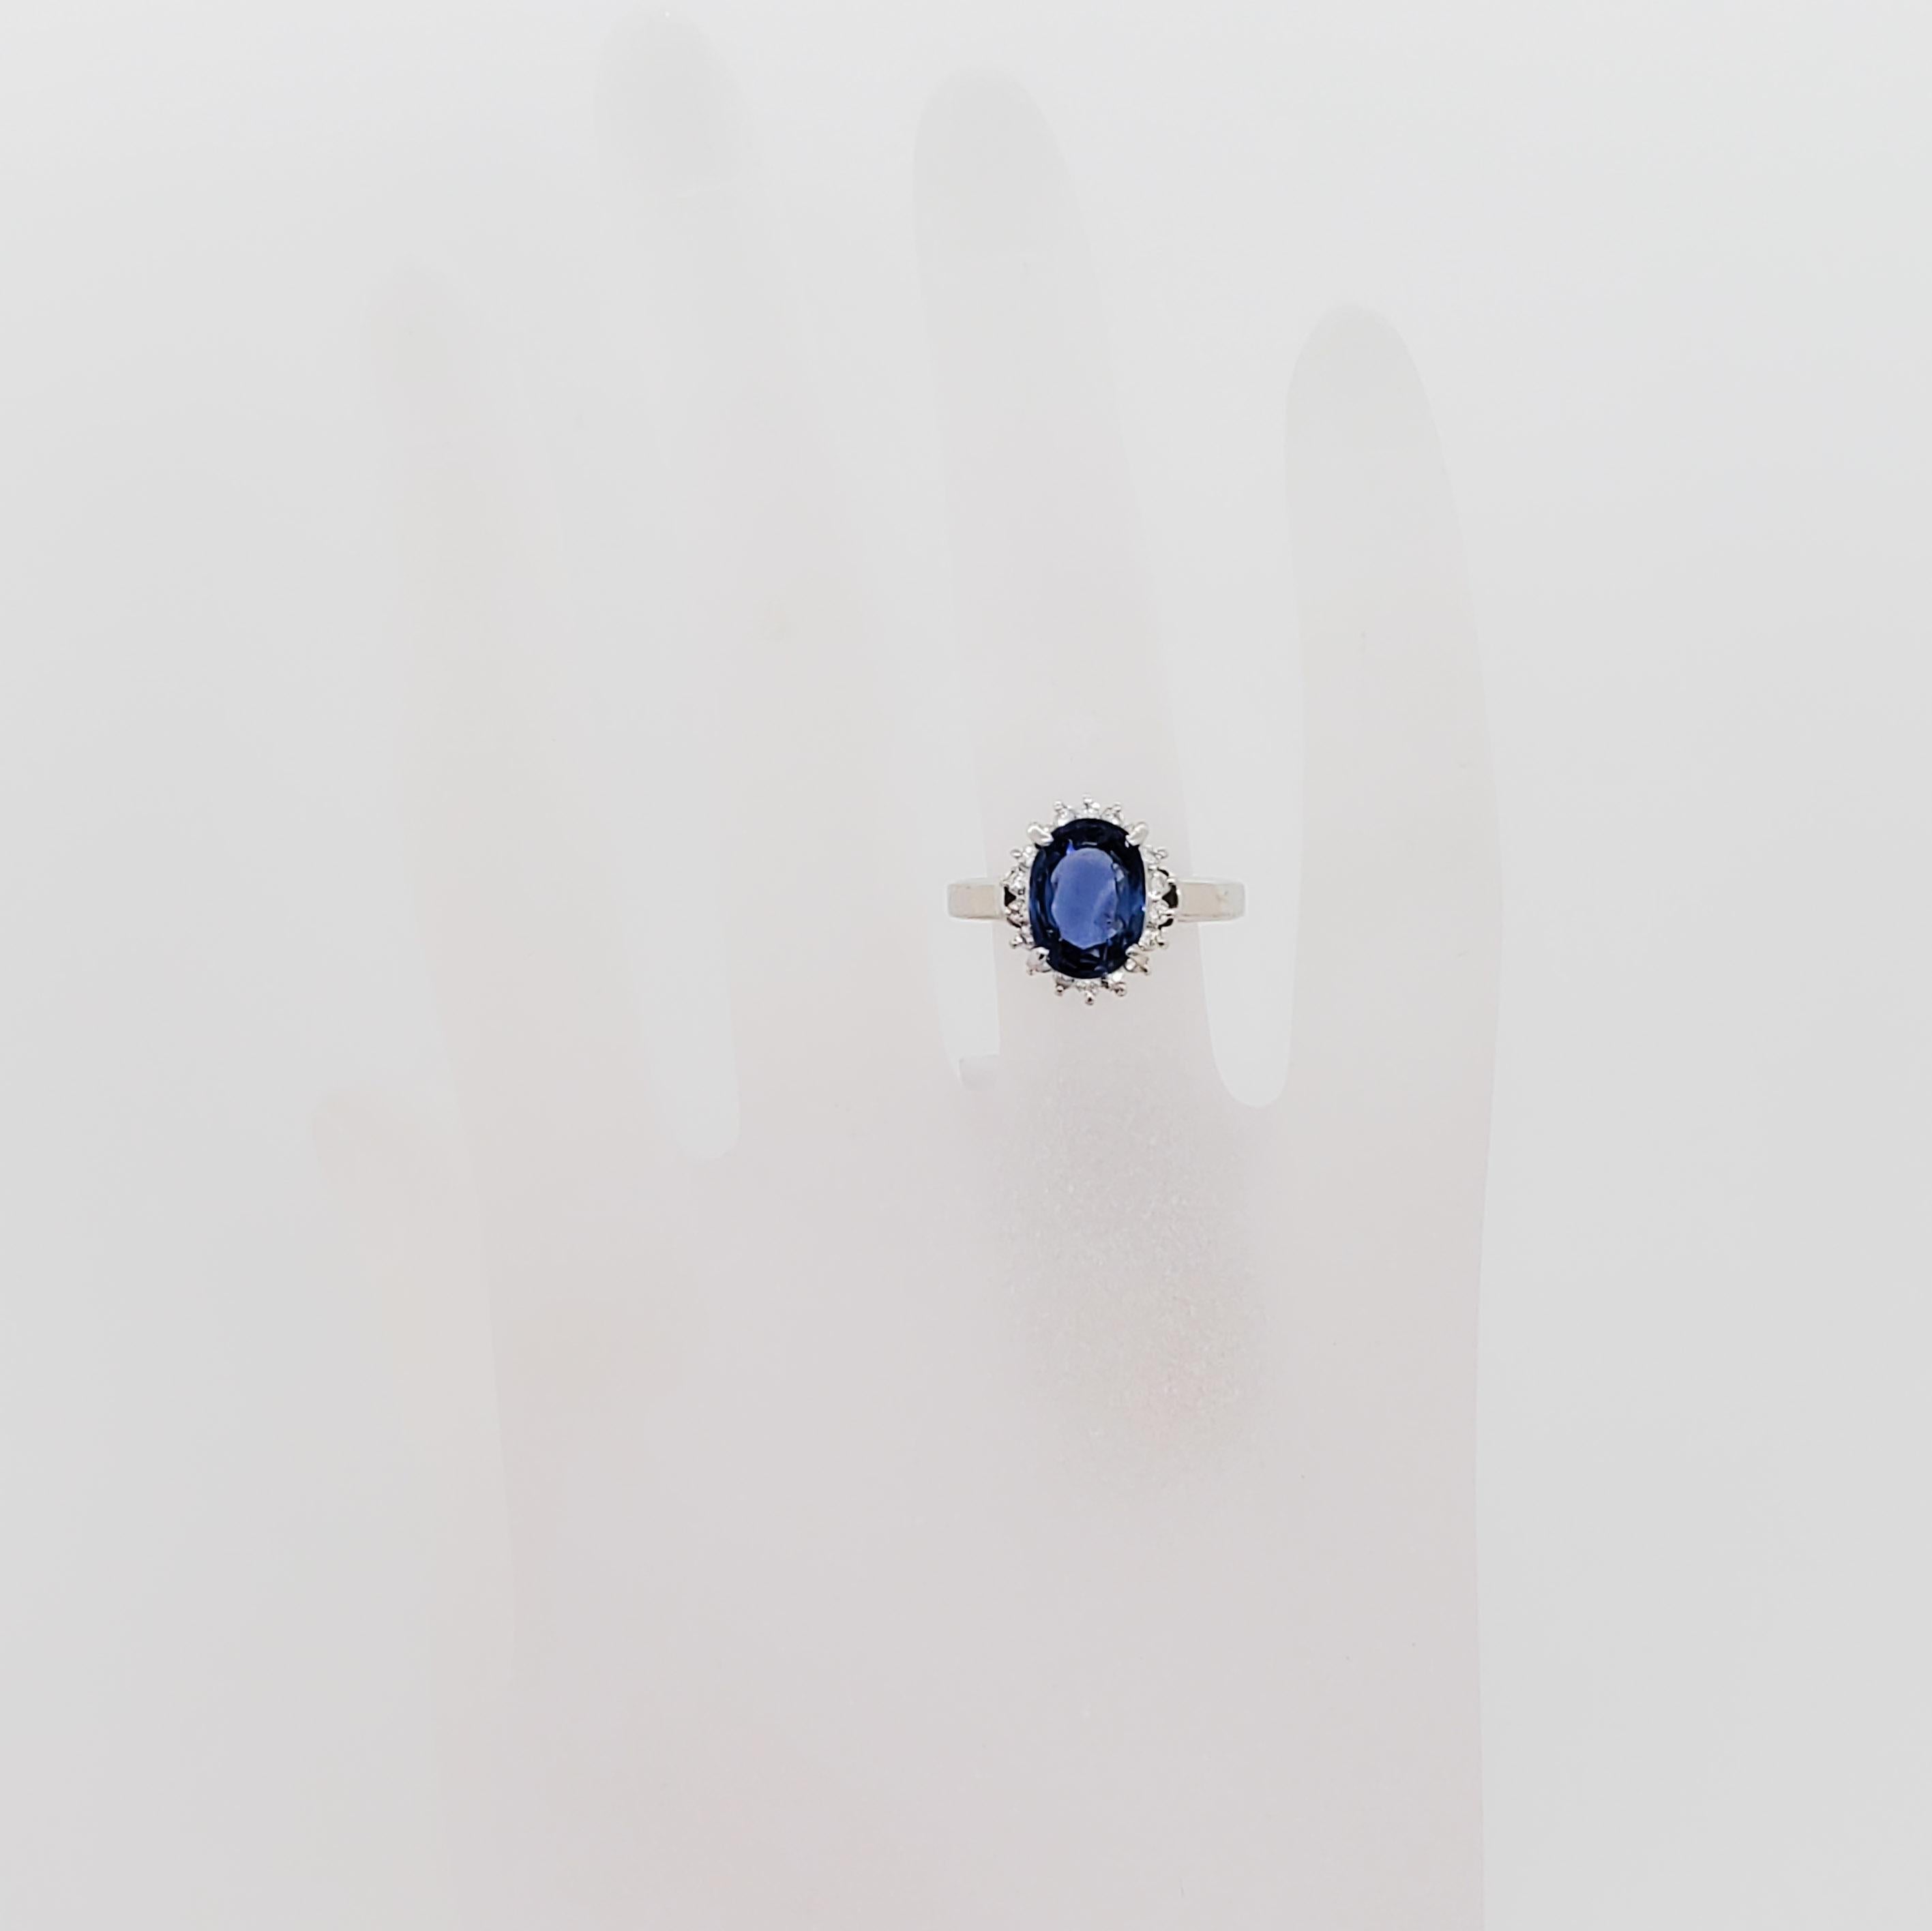 Beautiful deep blue color blue sapphire oval weighing 2.80 ct. with 0.26 ct. good quality white diamond rounds. Handmade mounting in platinum in ring size 6. Mint condition.